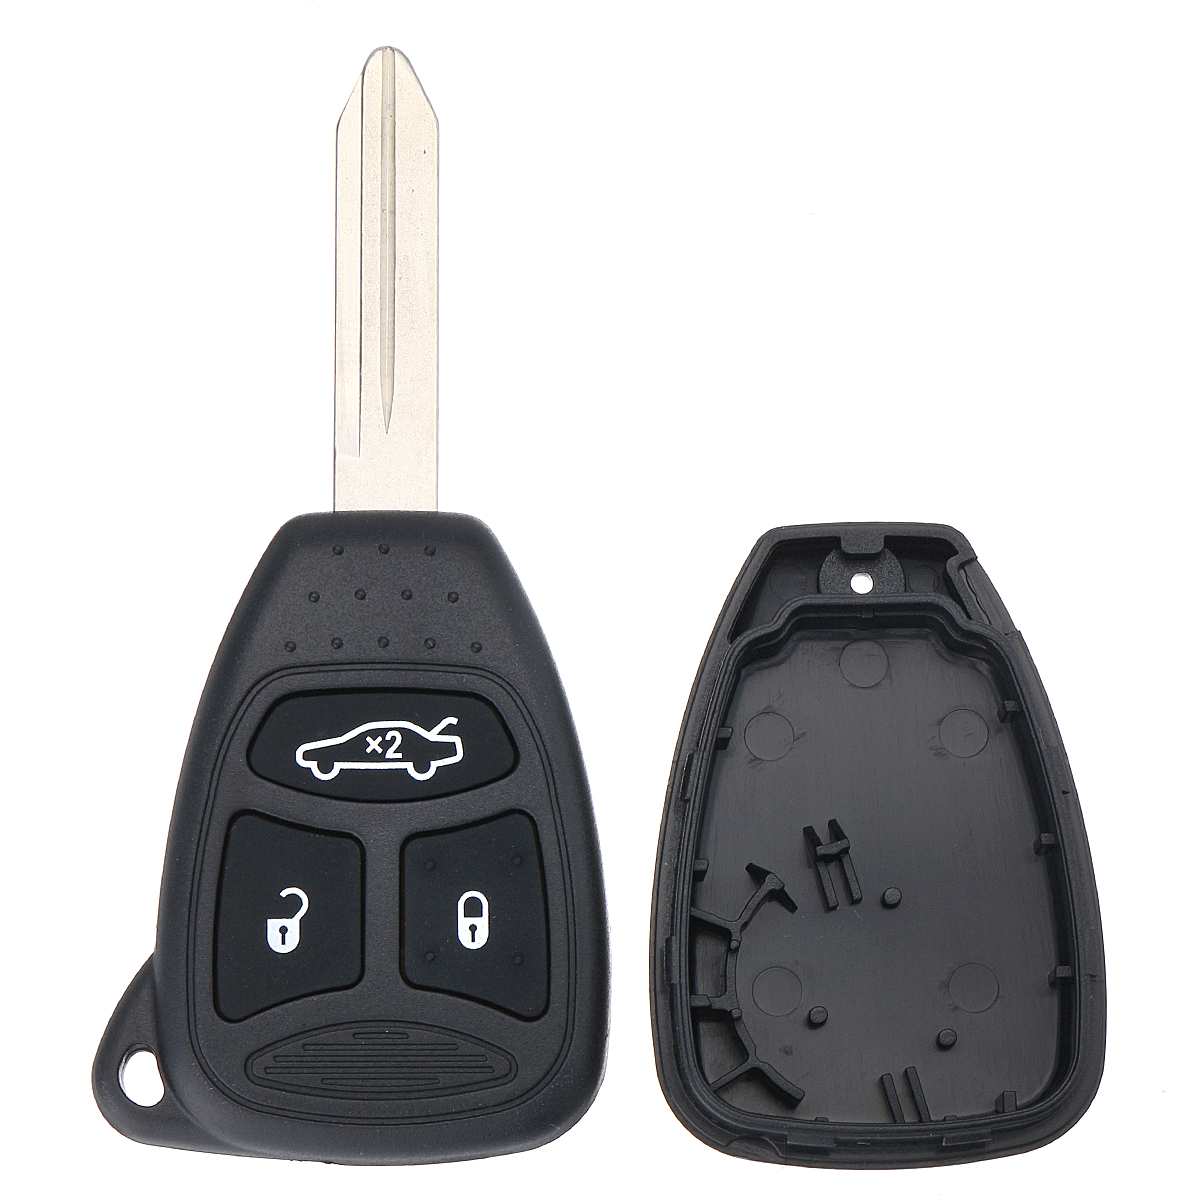 

3 Buttons Car Remote Key Fob Case Shell With Uncut Blade A48 For Chrysler Dodge